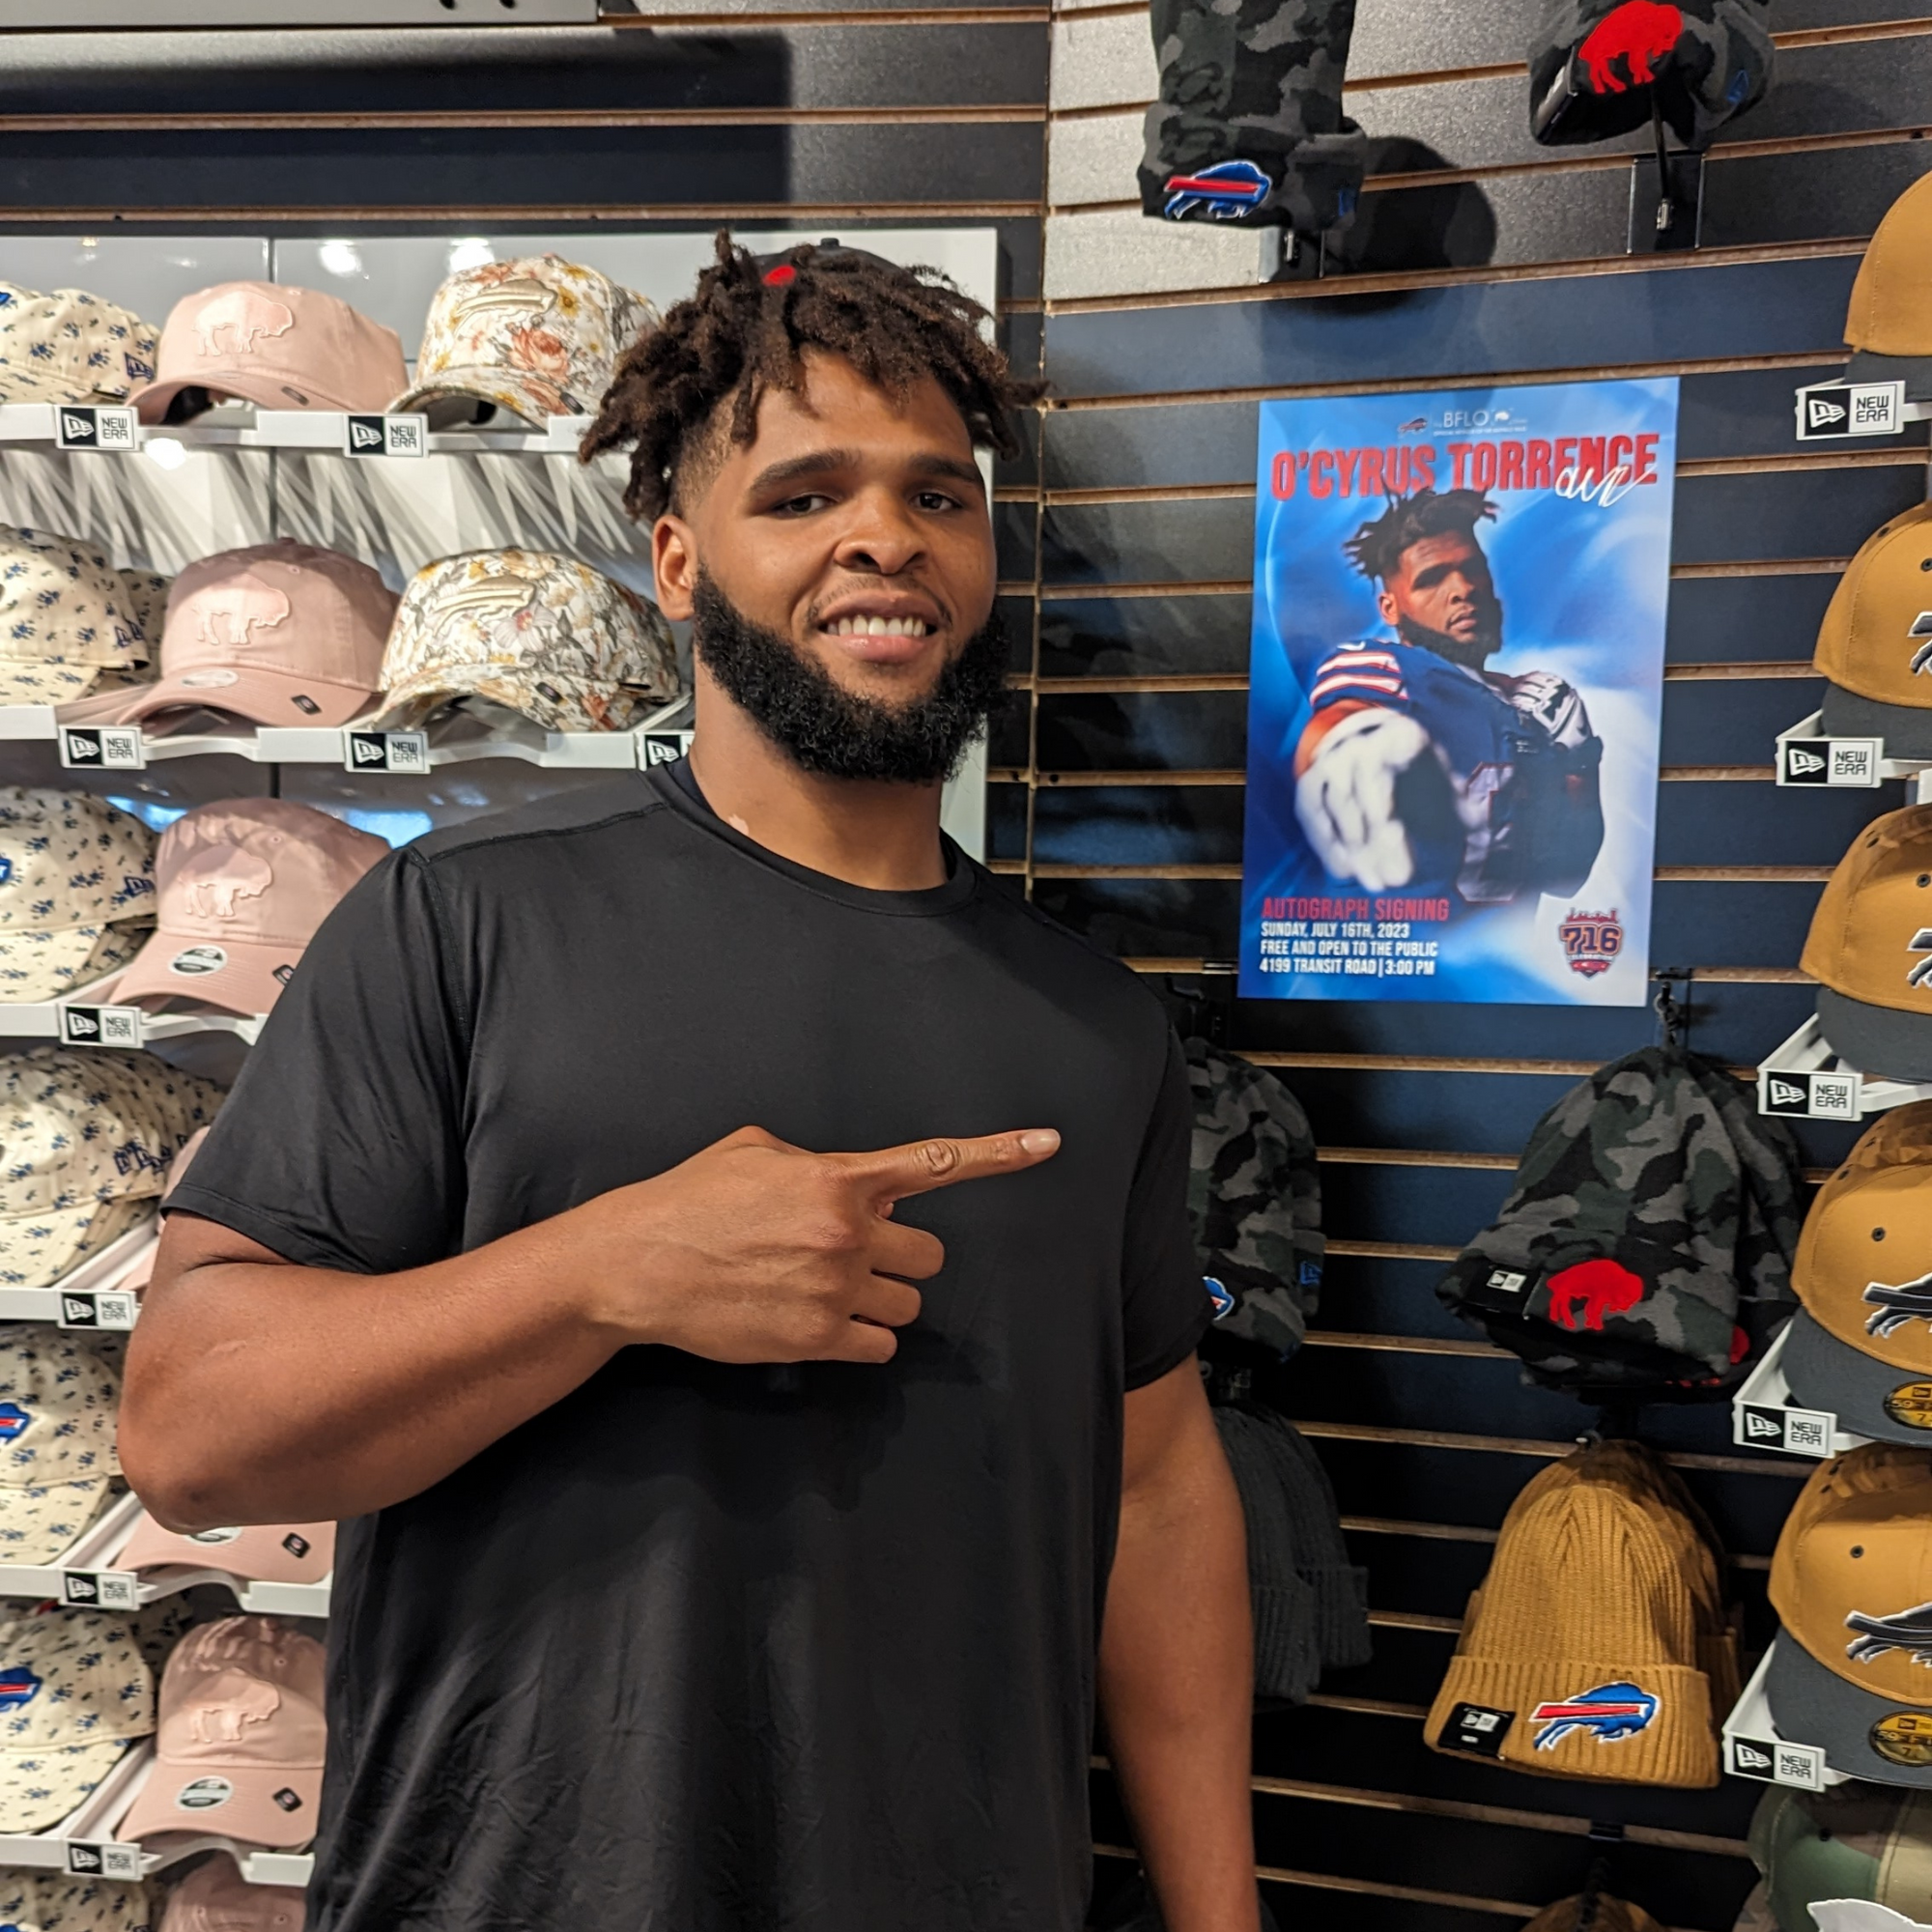 ocyrus torrence, buffalo bills, at the bflo store